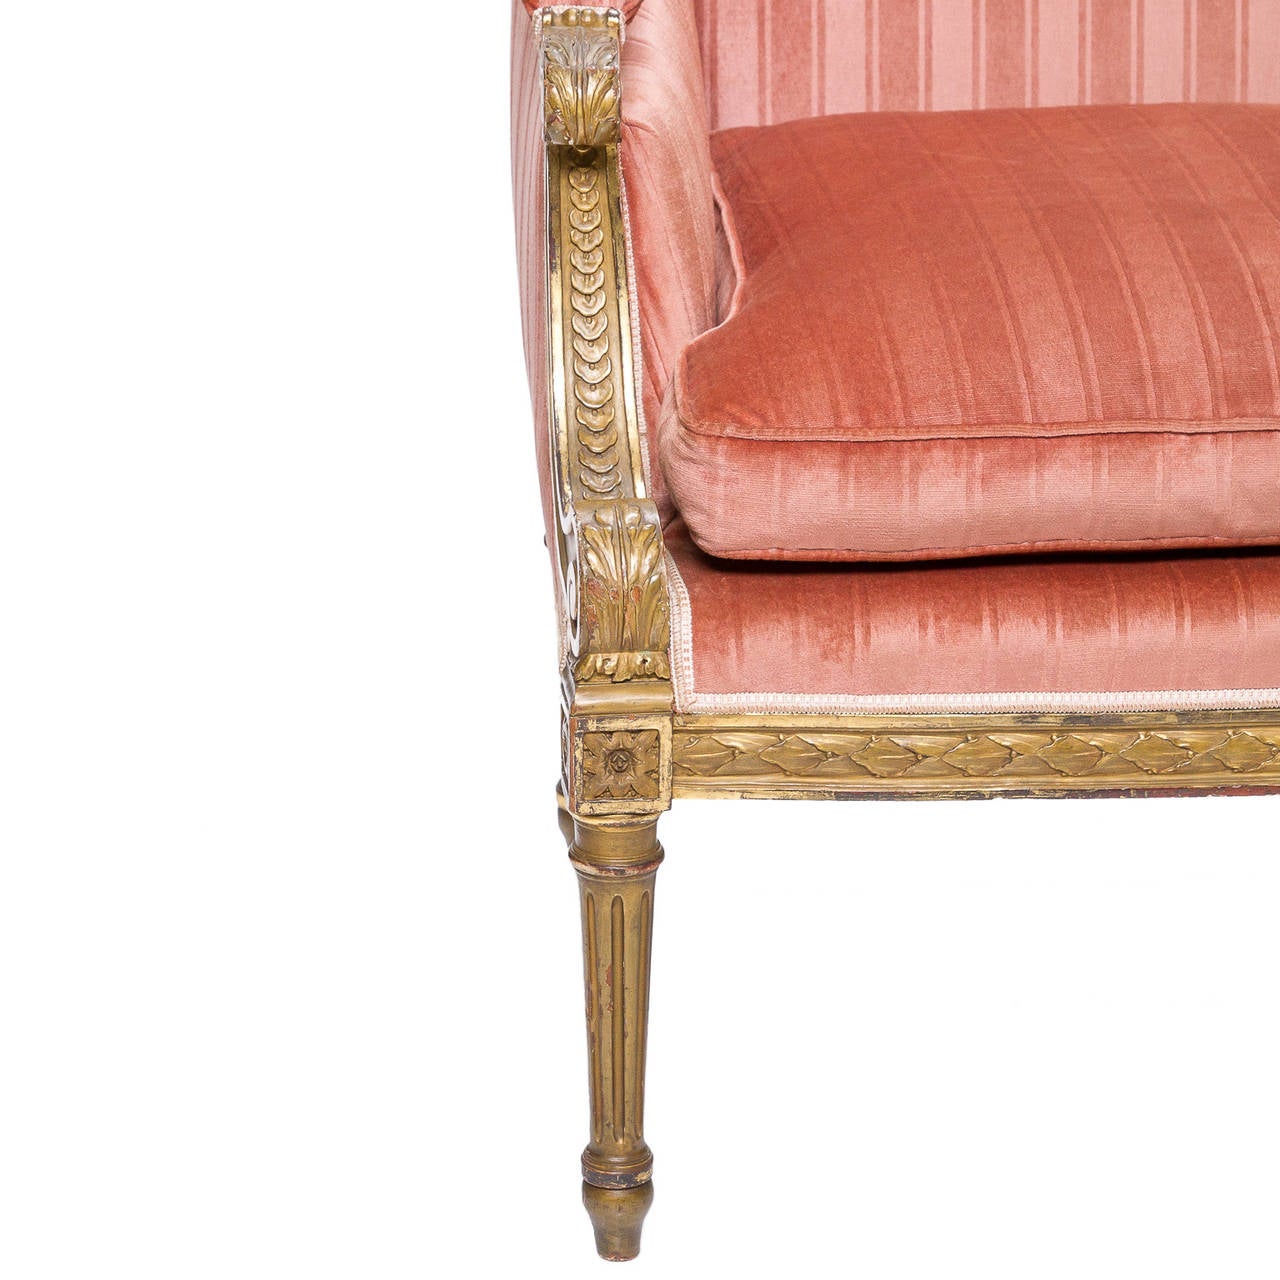 19th century Louis XVI giltwood settee a superb Louis XVI giltwood settee with a luxurious fabric. This settee to me is in the style of “Delafosse” A master of the garlands and noticing the two volutes was in his style. The settee has a unique